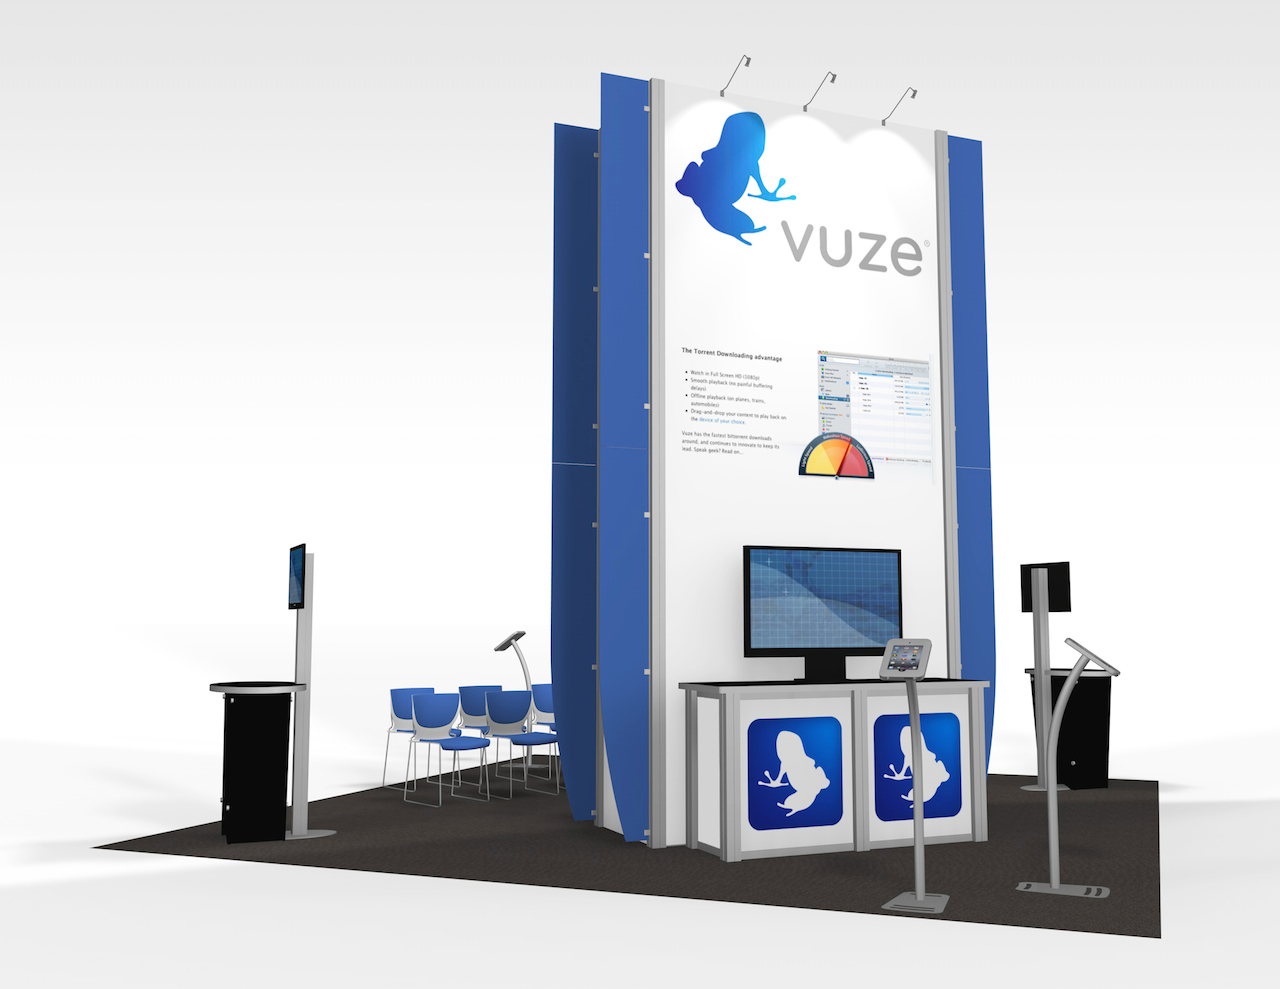 20x20 Island Trade Show Exhibit Rental with multiple video monitors and iPad kiosks